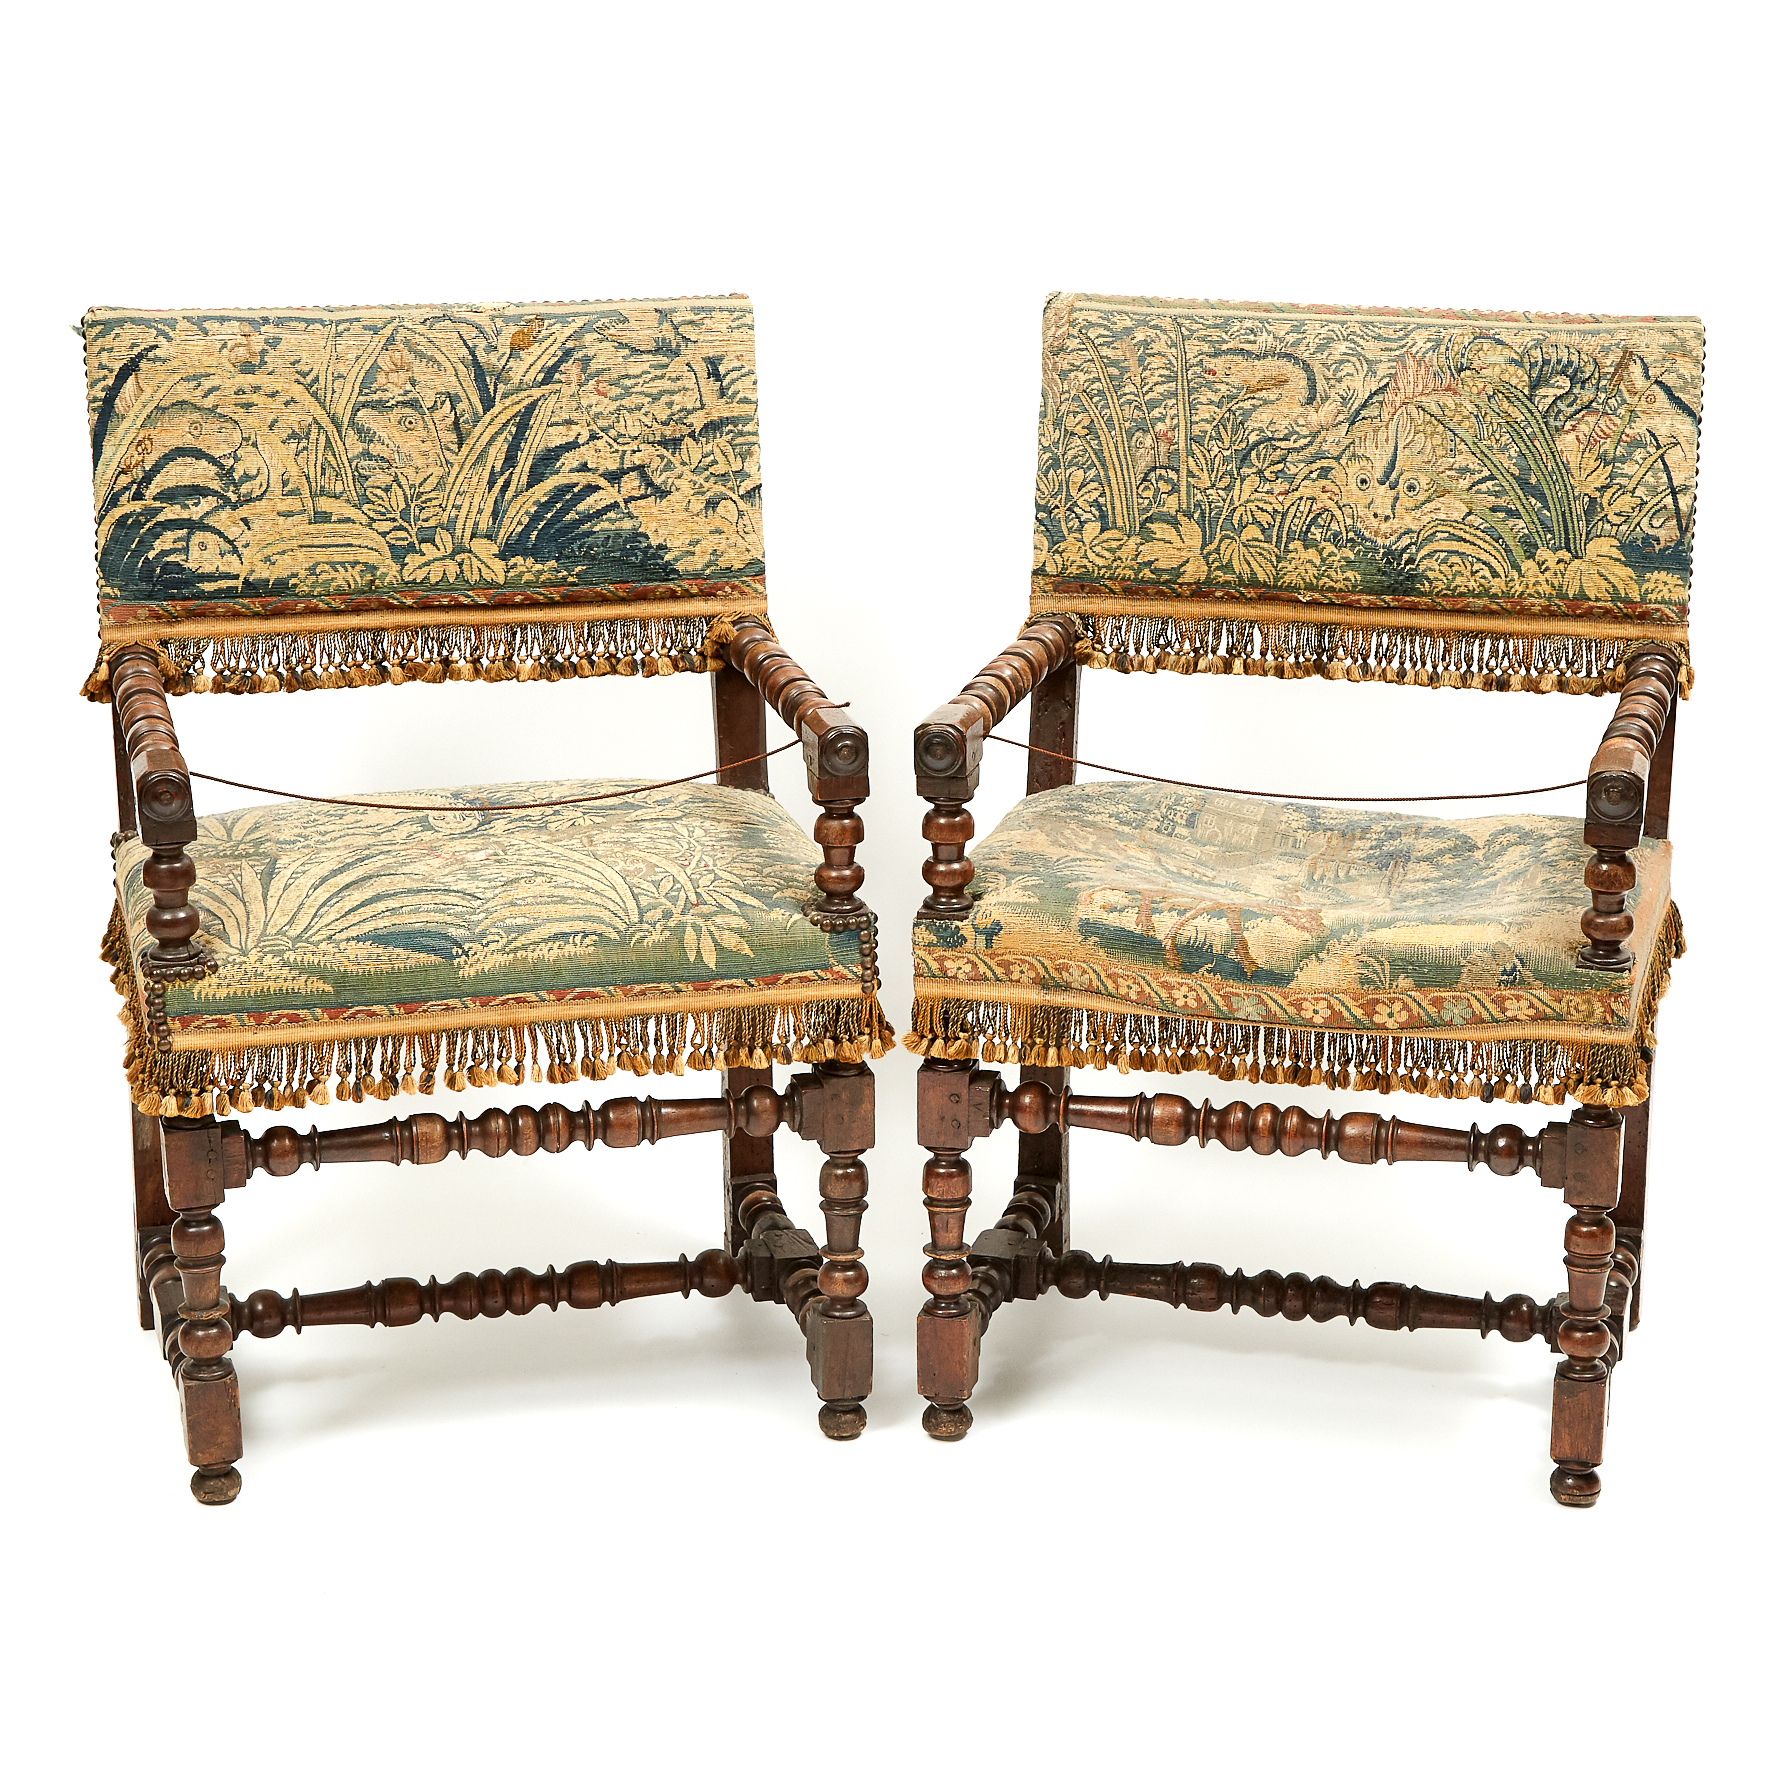 Pair of Jacobean Spool Turned Walnut Open Arm Chairs, 17th century